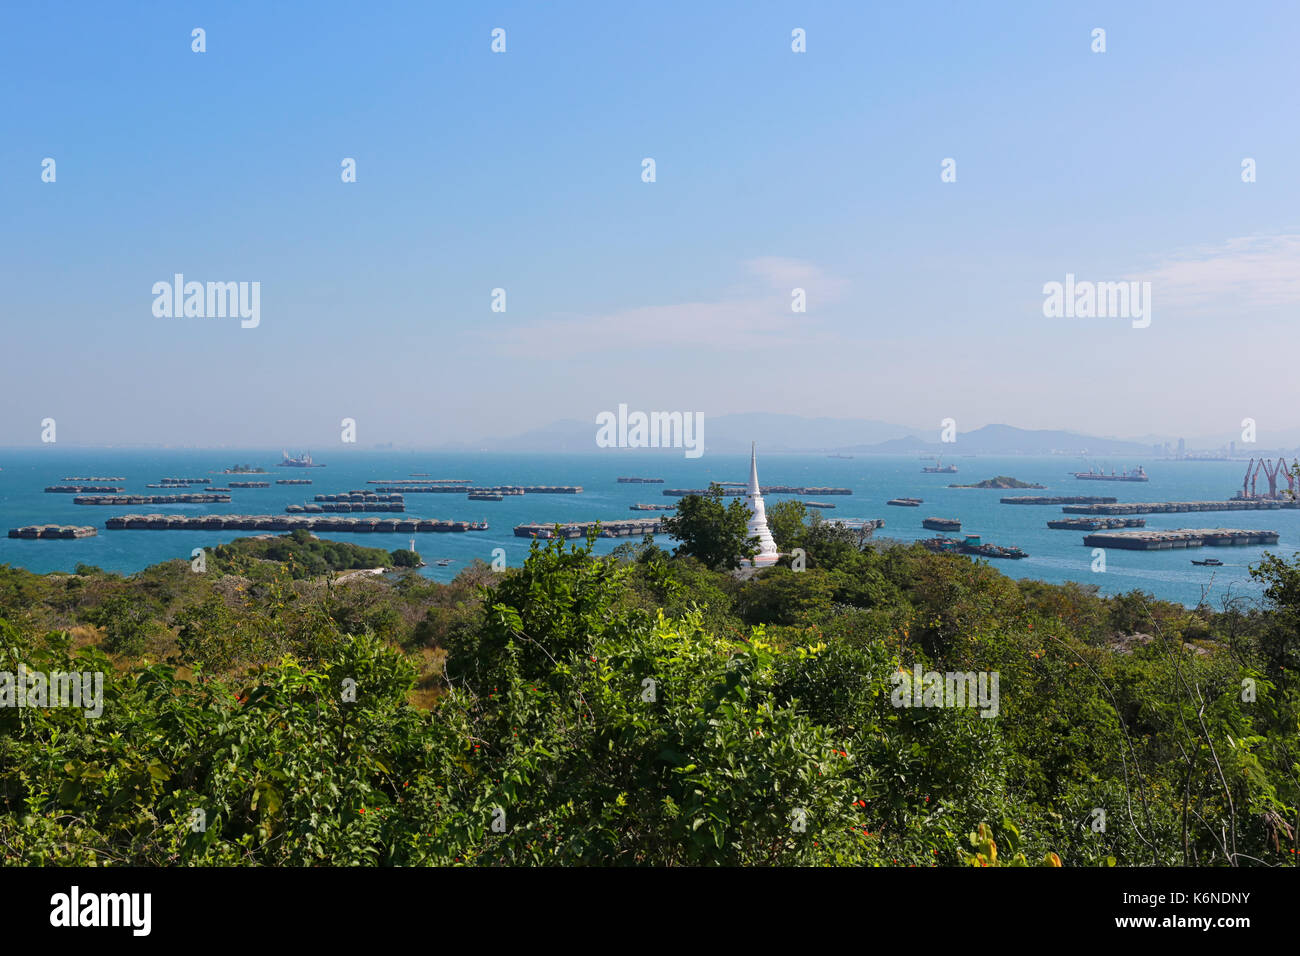 white pagoda of Chulachomklao in Ko Sichang at Chonburi province,Famous tourist attractions in Thailand. Stock Photo